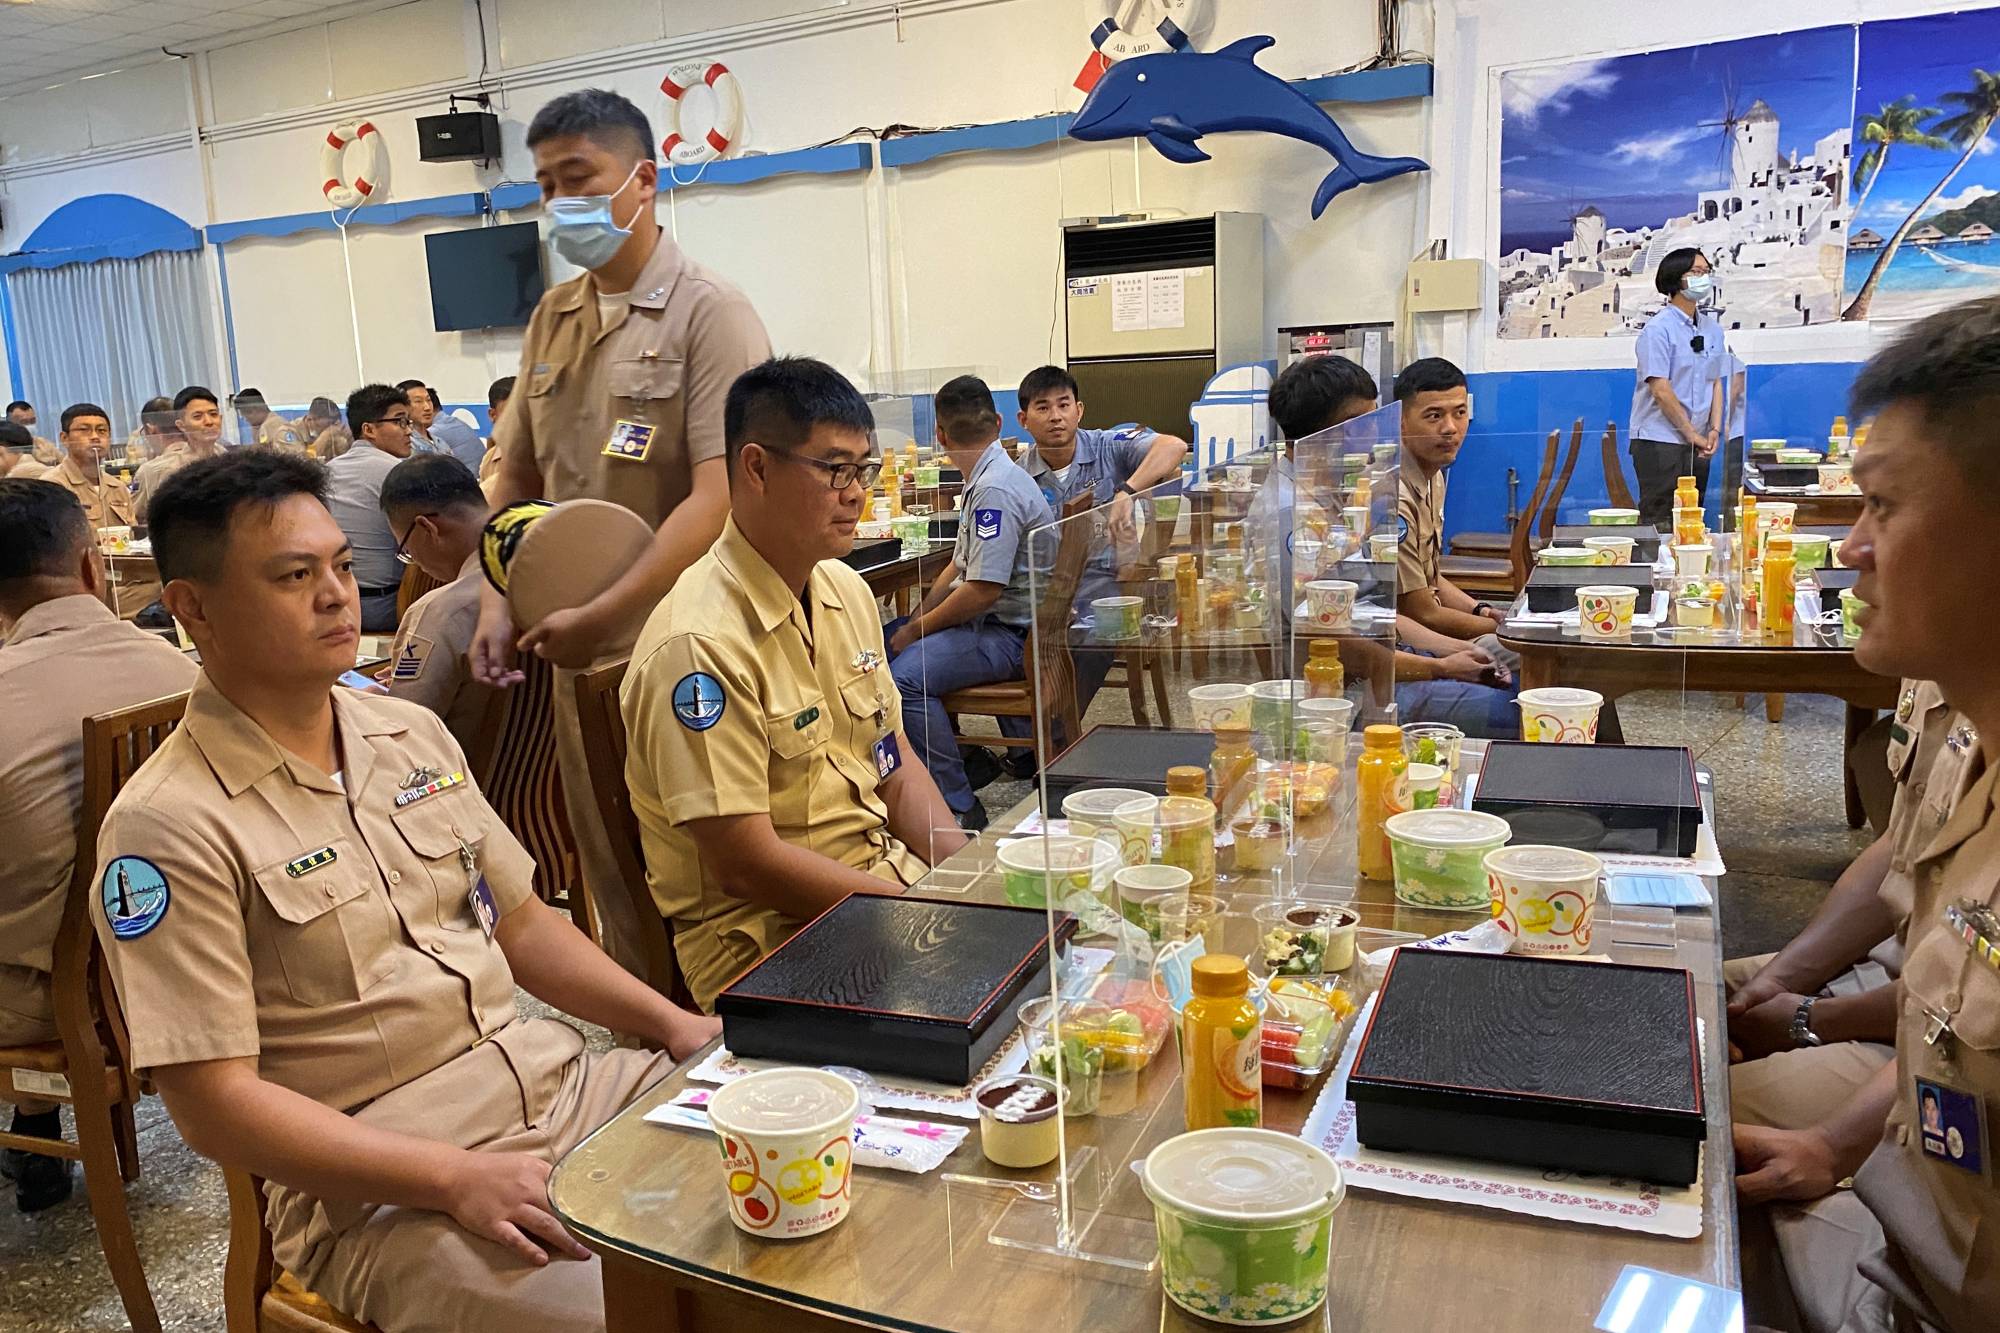 Taiwan navy sailors wait for Taiwan's President Tsai Ing-wen to arrive for lunch with them at the Zuoying naval base in Kaohsiung, Taiwan, on Saturday. | REUTERS